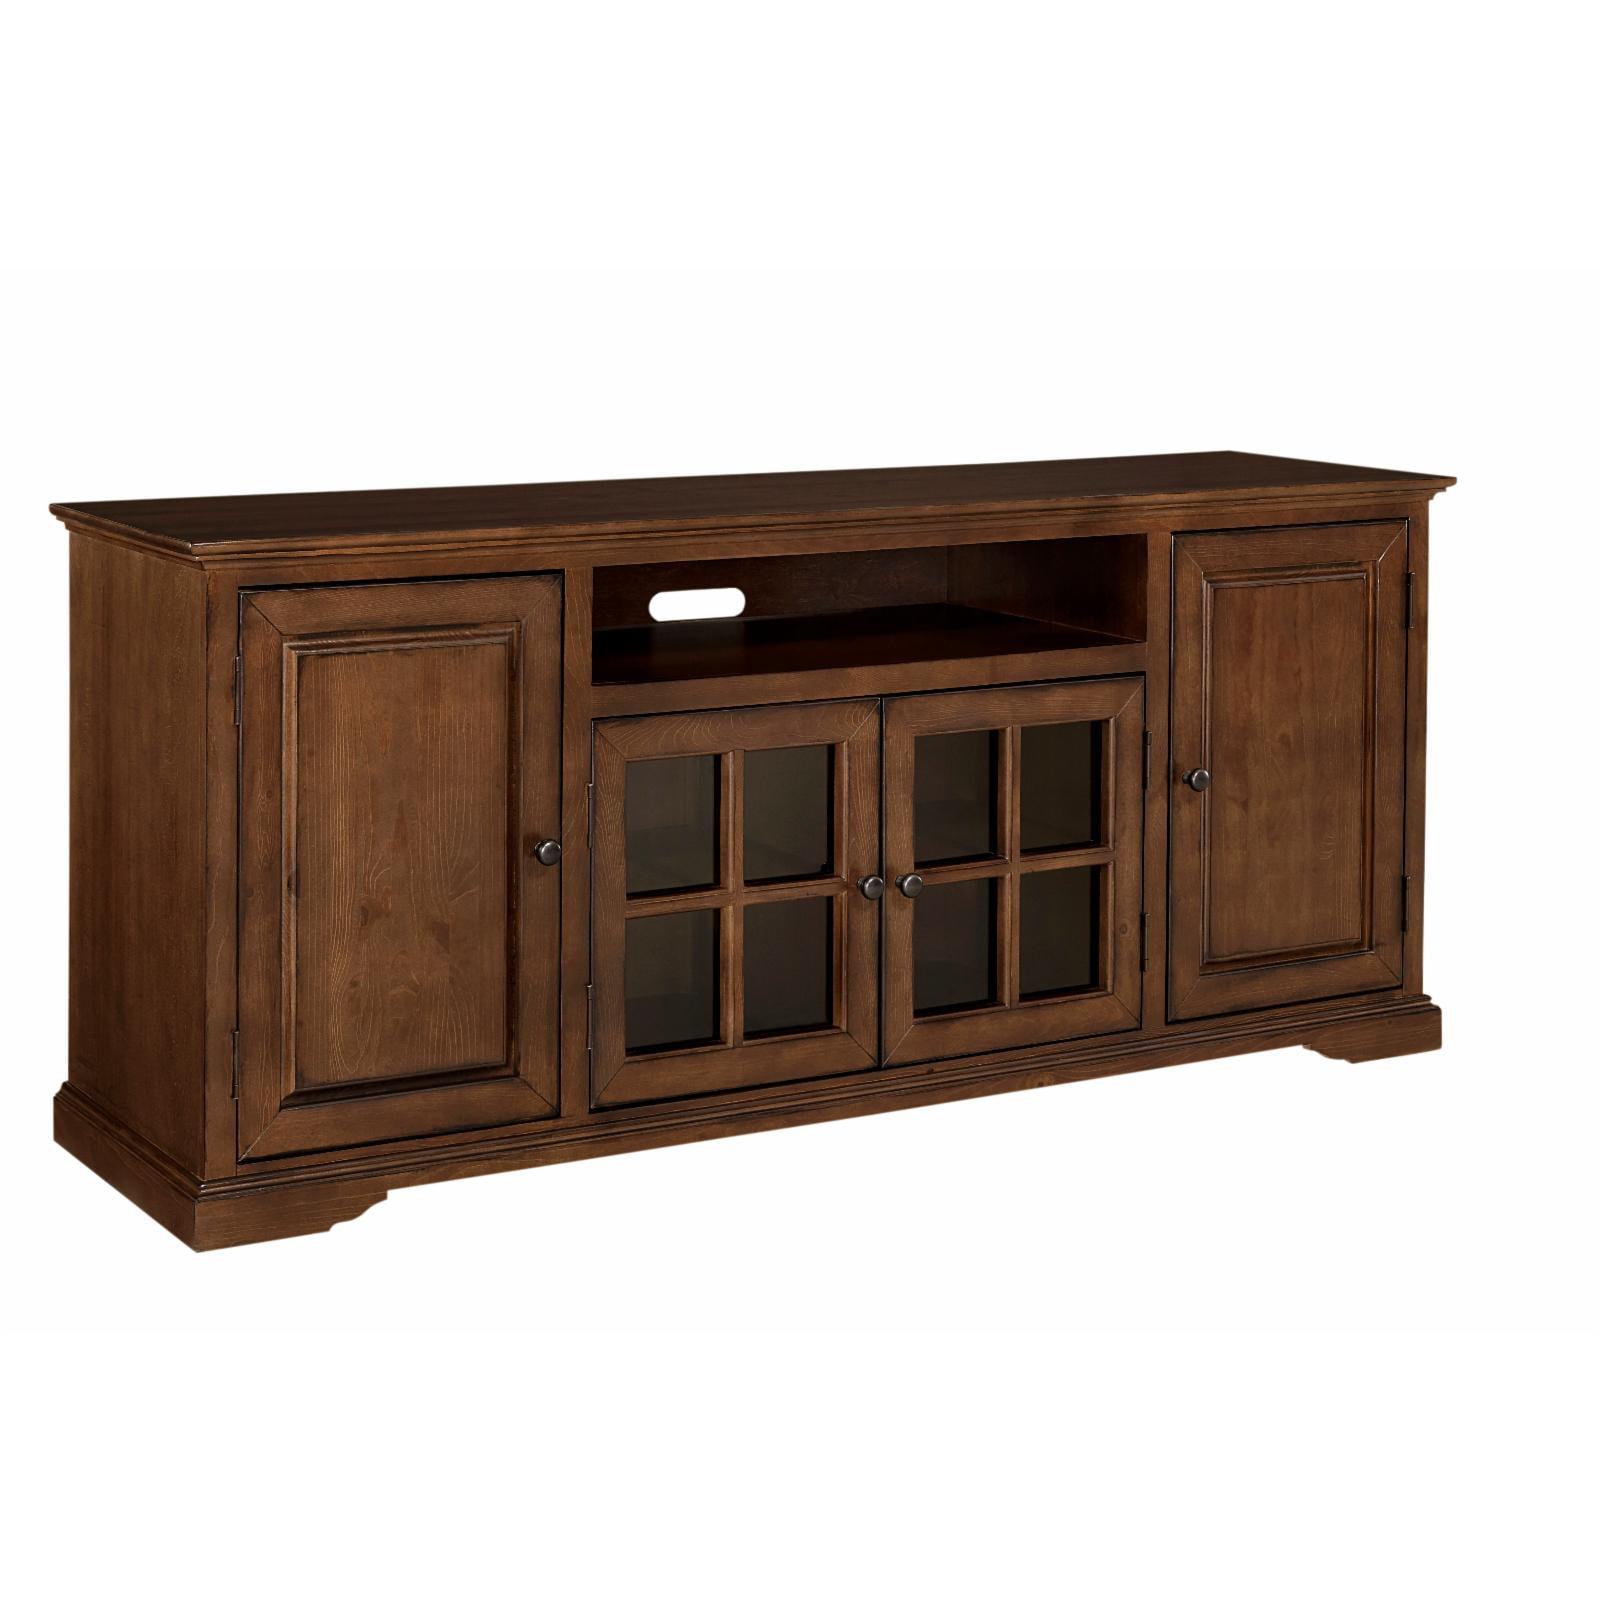 Auburn Cherry Traditional TV Console with Cabinet & Mount, 74 Inch